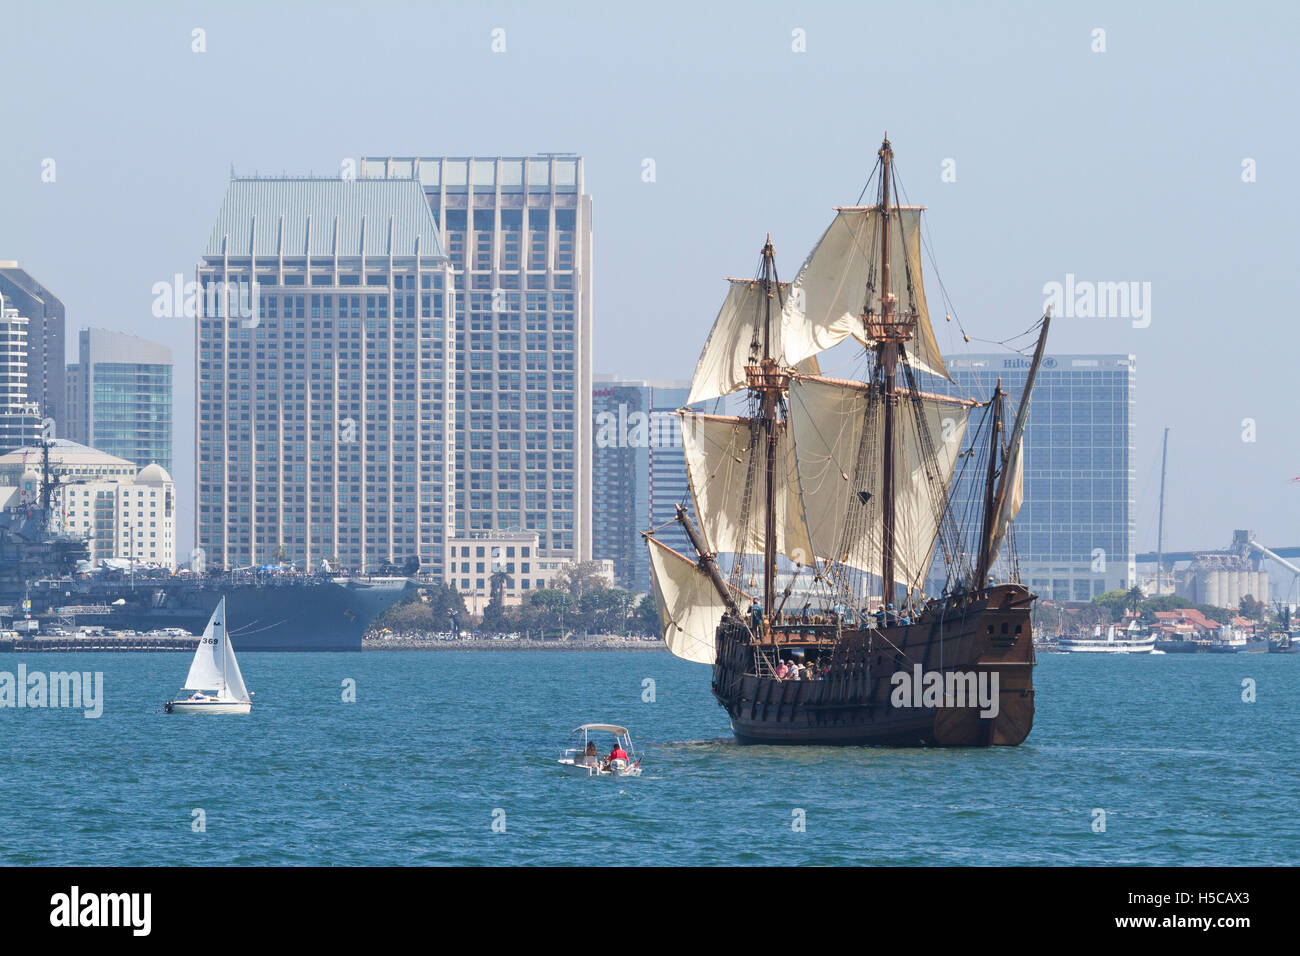 Tall ship San Salvador in 2016 Festival of Sail, Parade of Ships, San Diego Bay, CA with downtown in background Stock Photo